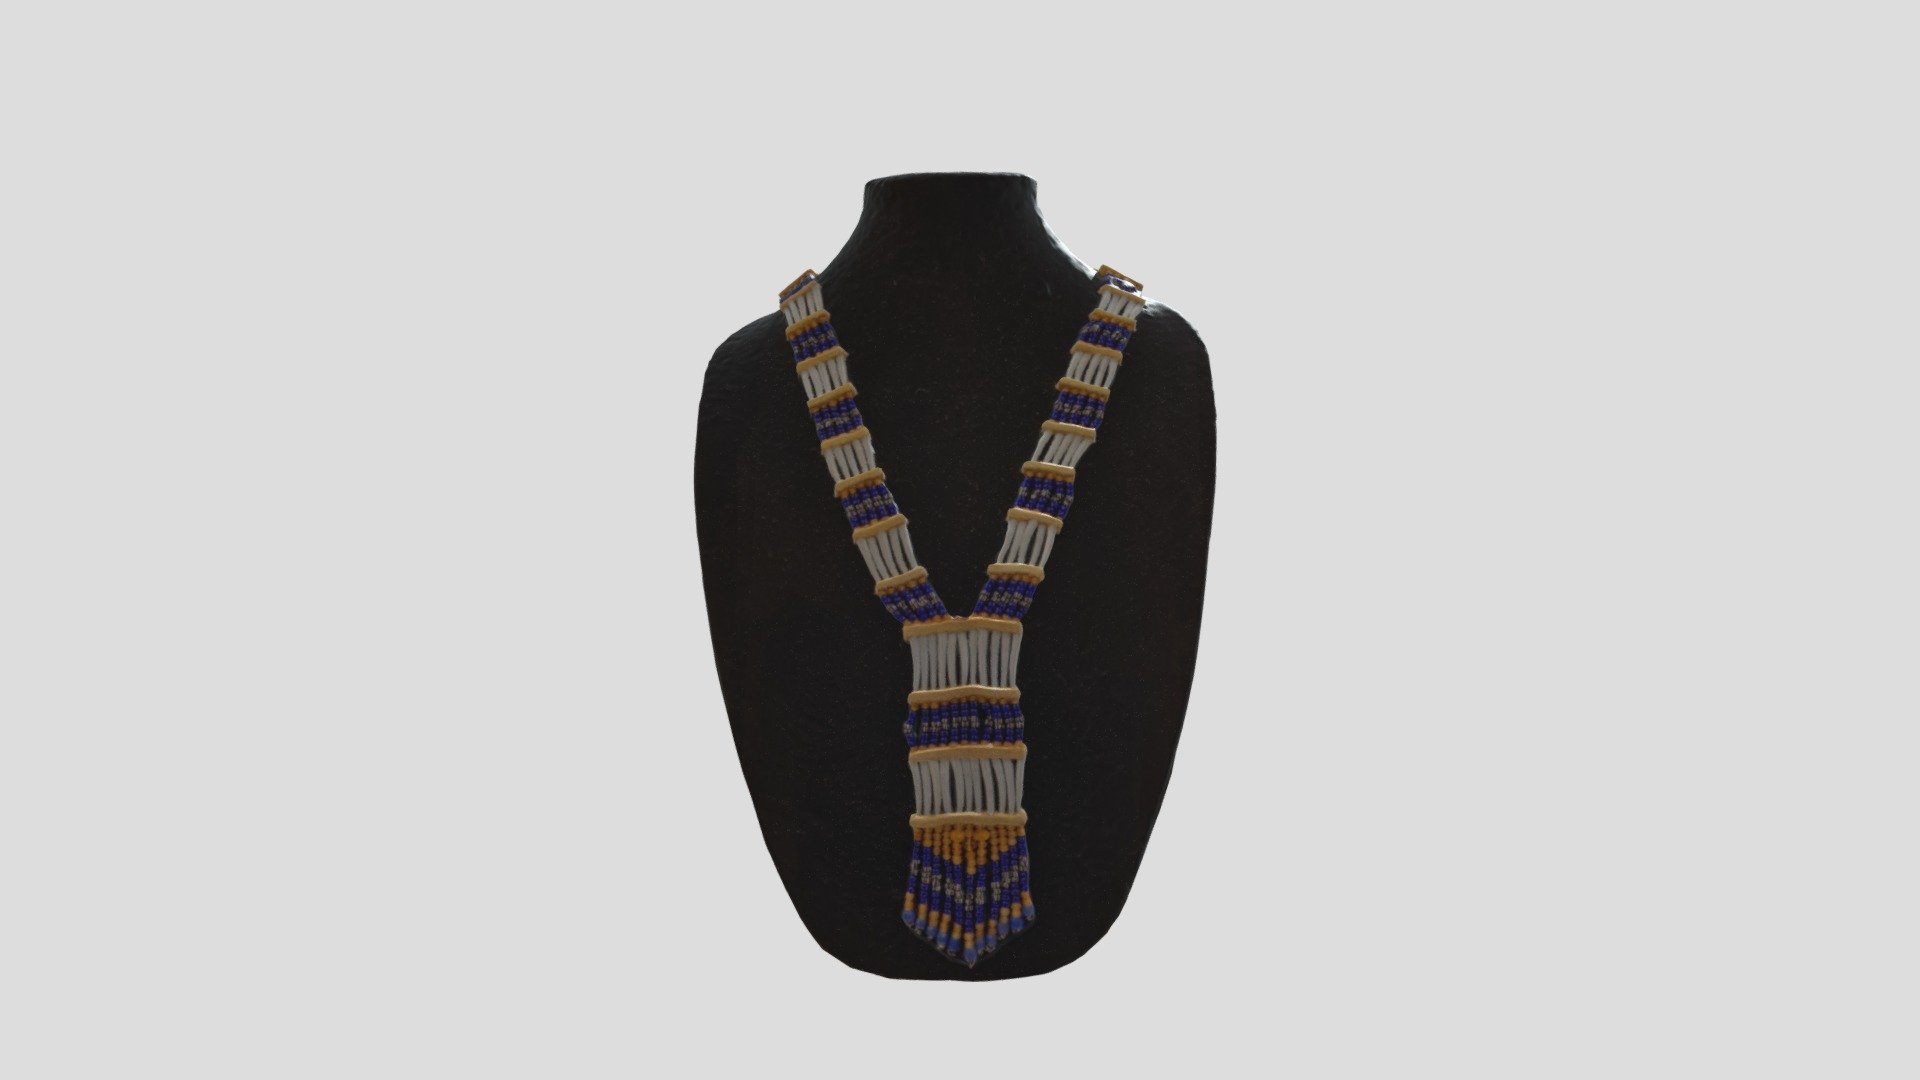 Created by Koyukon artist Selina Alexander. 

Materials: Dentalia shells, smoke-tanned moosehide, cariboue hide, glass trade beads.

The use of dentalia shells in Athabscan regalia represents high status. The shells are a trade item that likely originates from the Vancouver area of Canada. The dentalia shell necklace is one of the five symbols used for wayfinding at the Alaska Native Heritage Center. It was commissioned by the Center directly with the artist 3d model